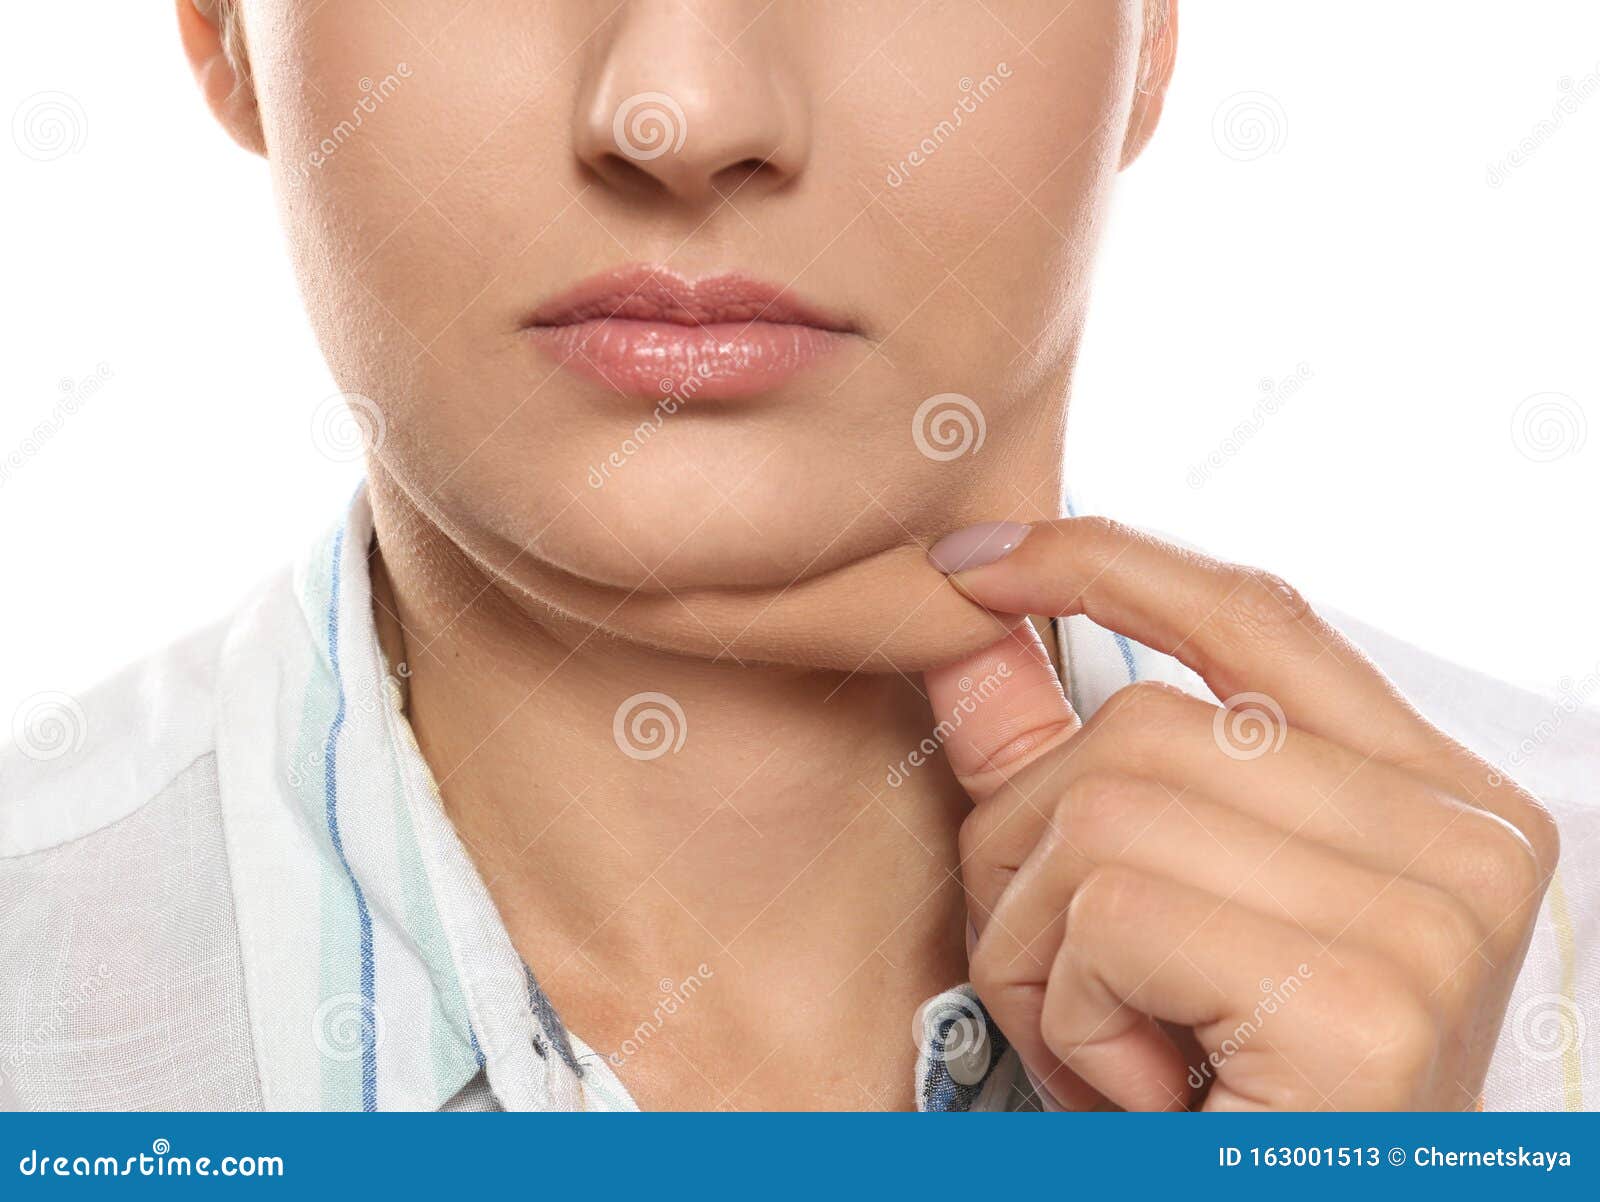 young woman with double chin on white background